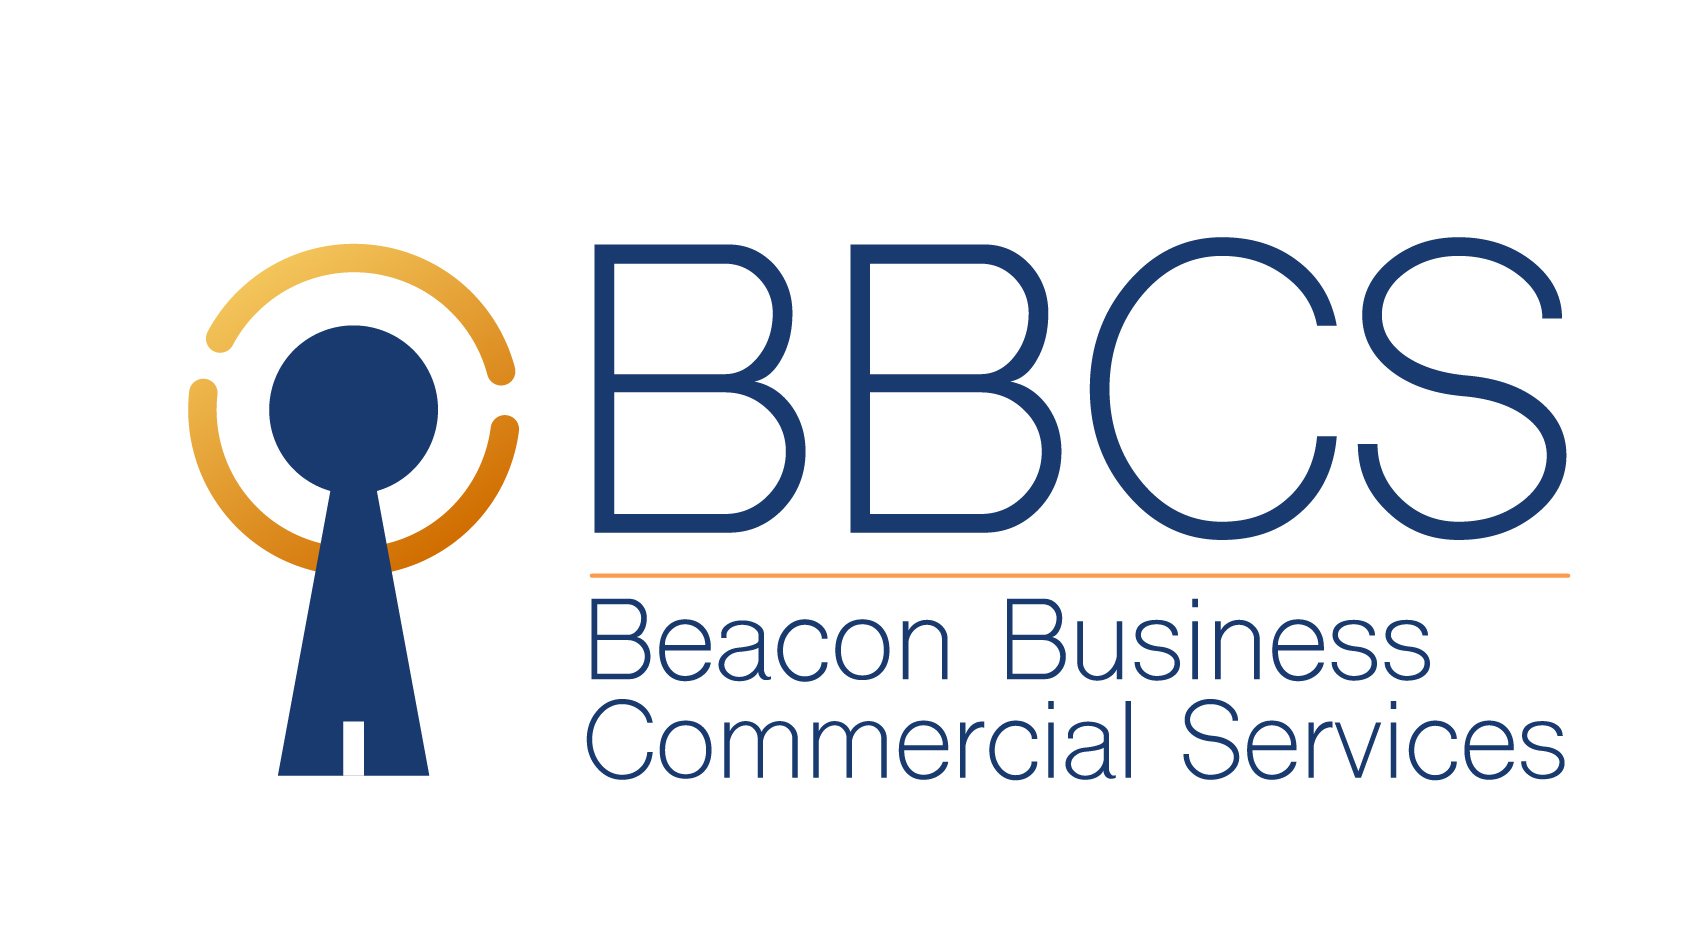 Beacon Business Commercial Services